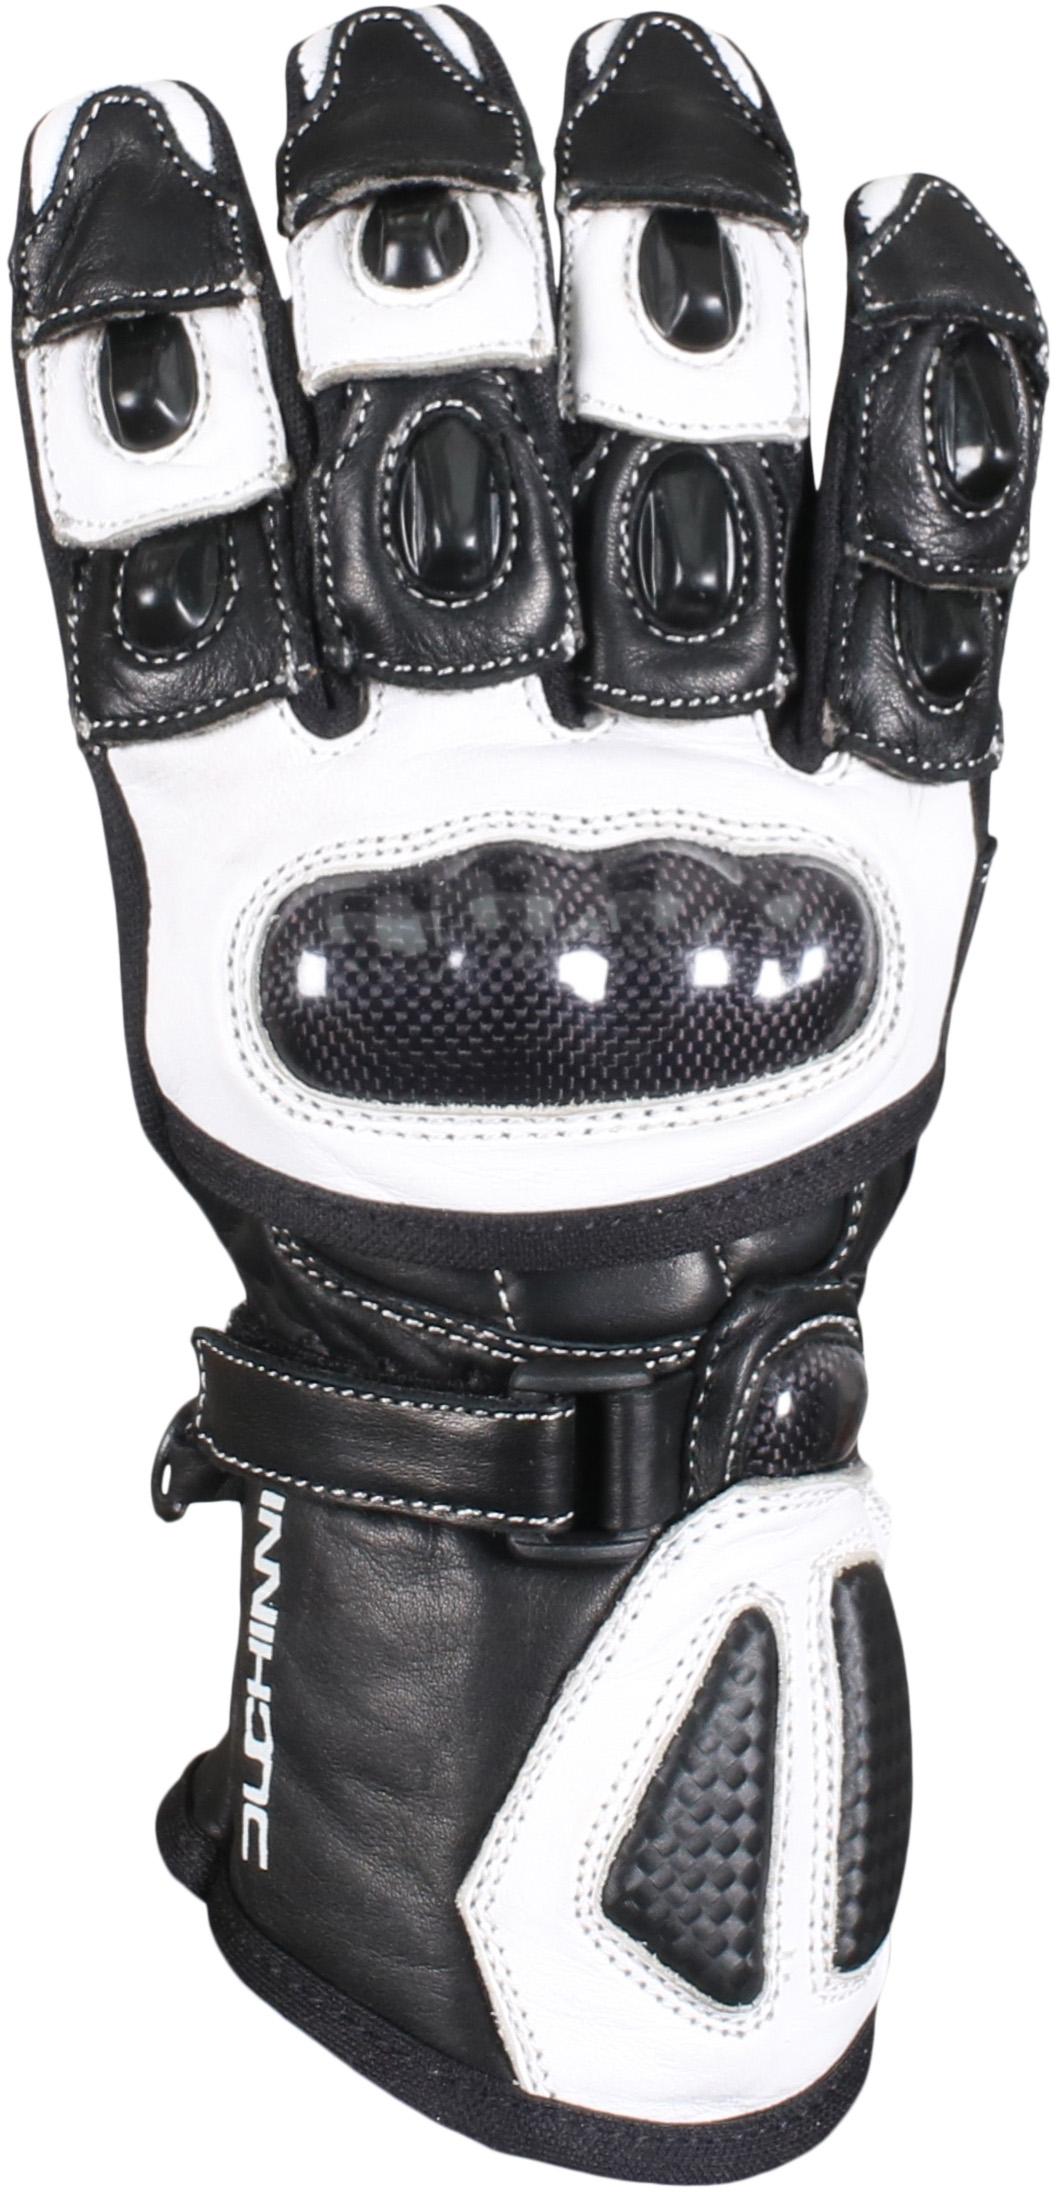 Duchinni Bambino Youth Motorcycle Gloves - Black And White, S